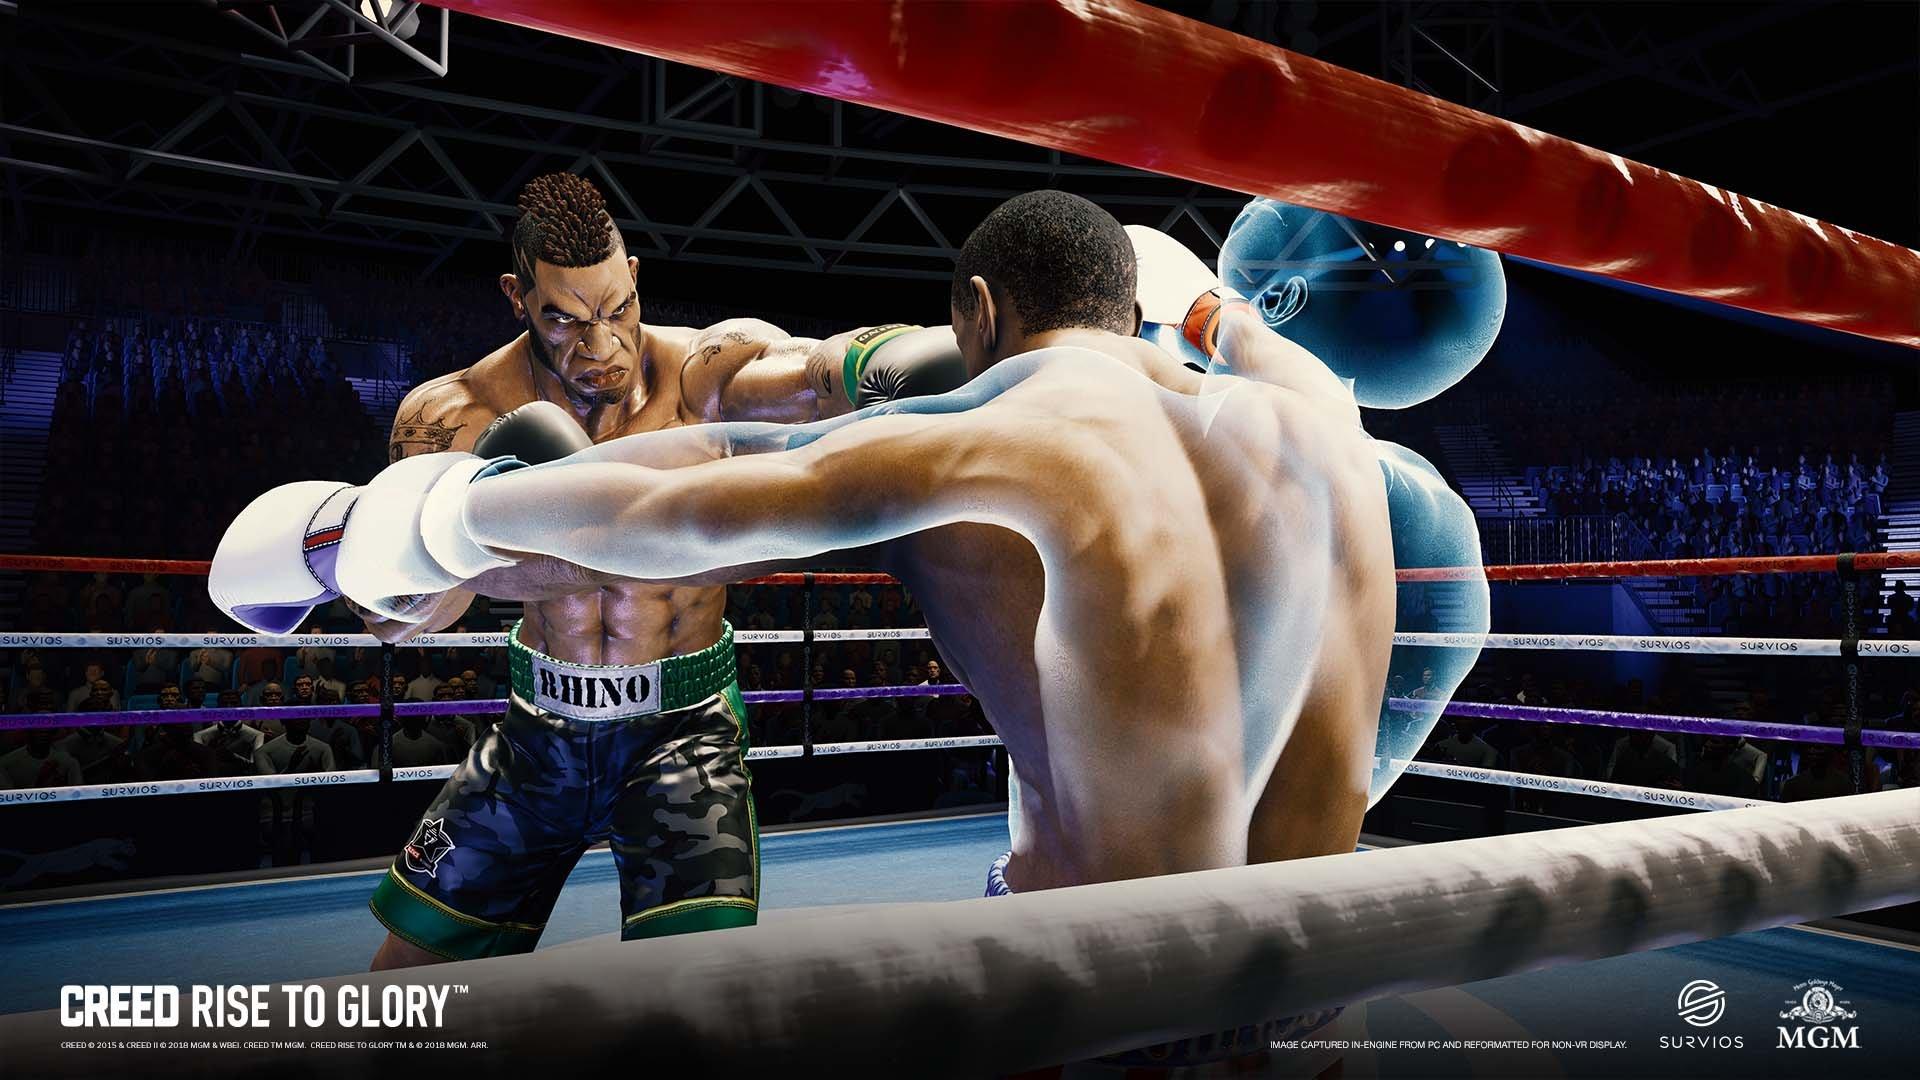 ps4 boxing vr